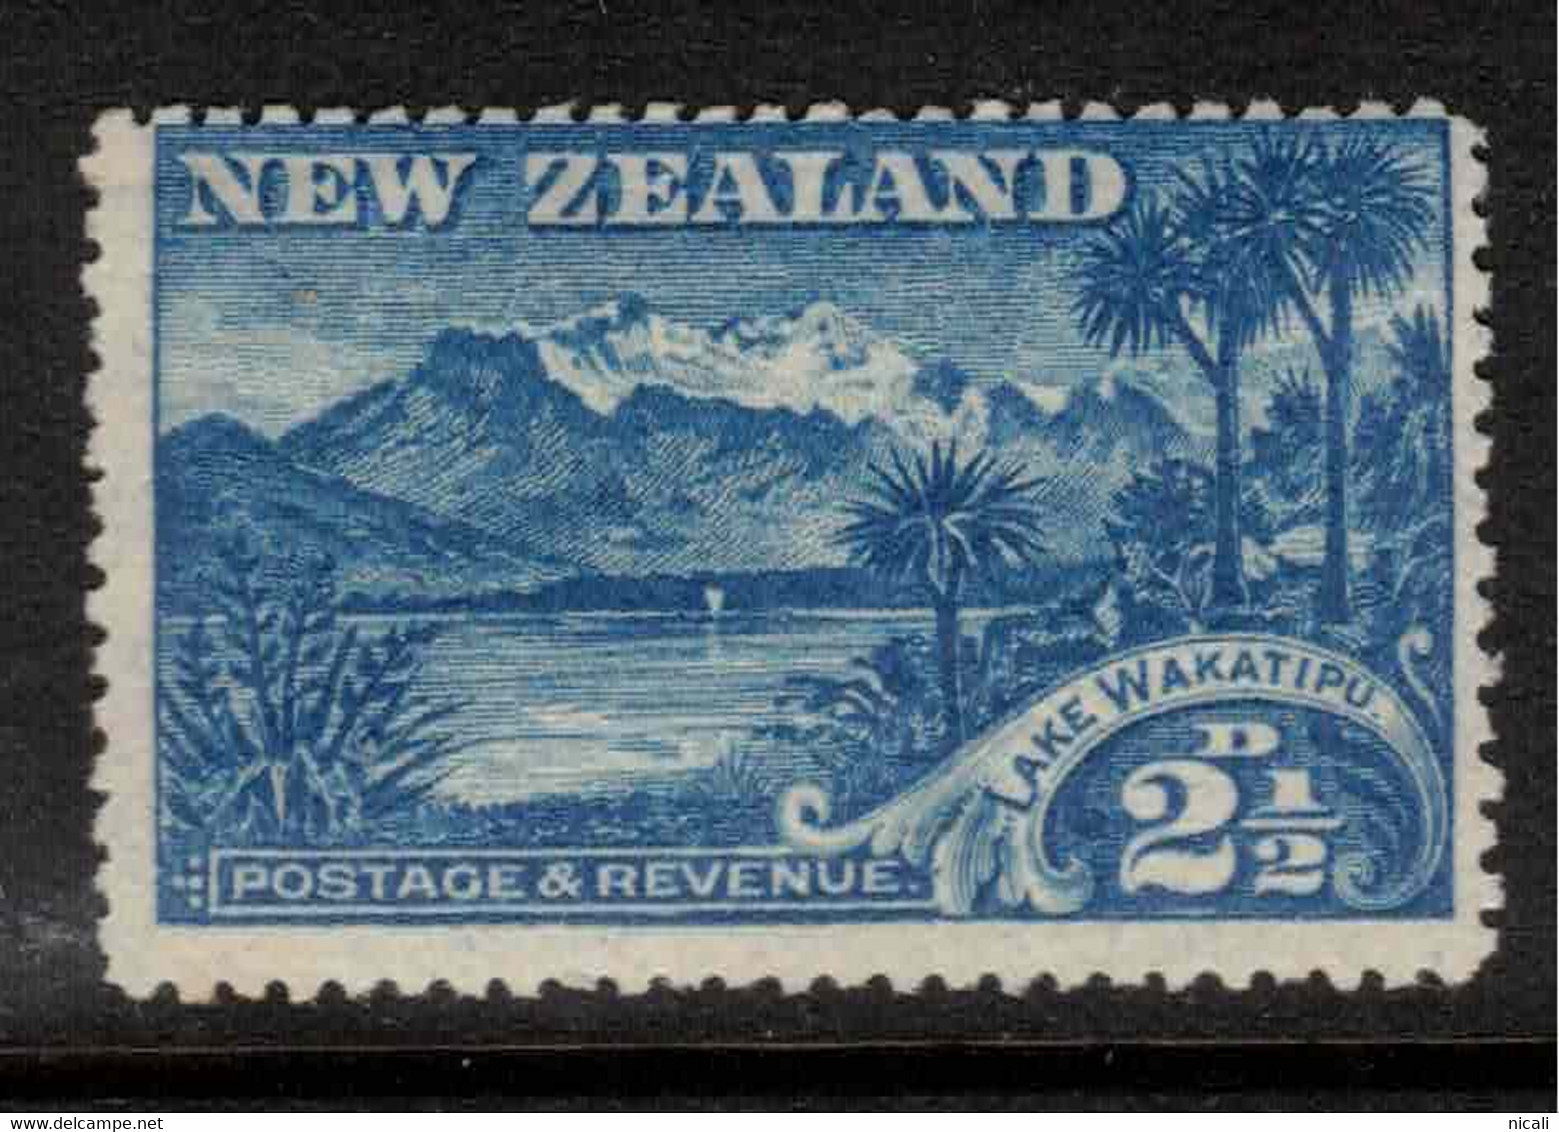 NZ 1898 2 1/2d Blue Lake Wakitipu SG 320 UNHM #AIP10 - Unused Stamps